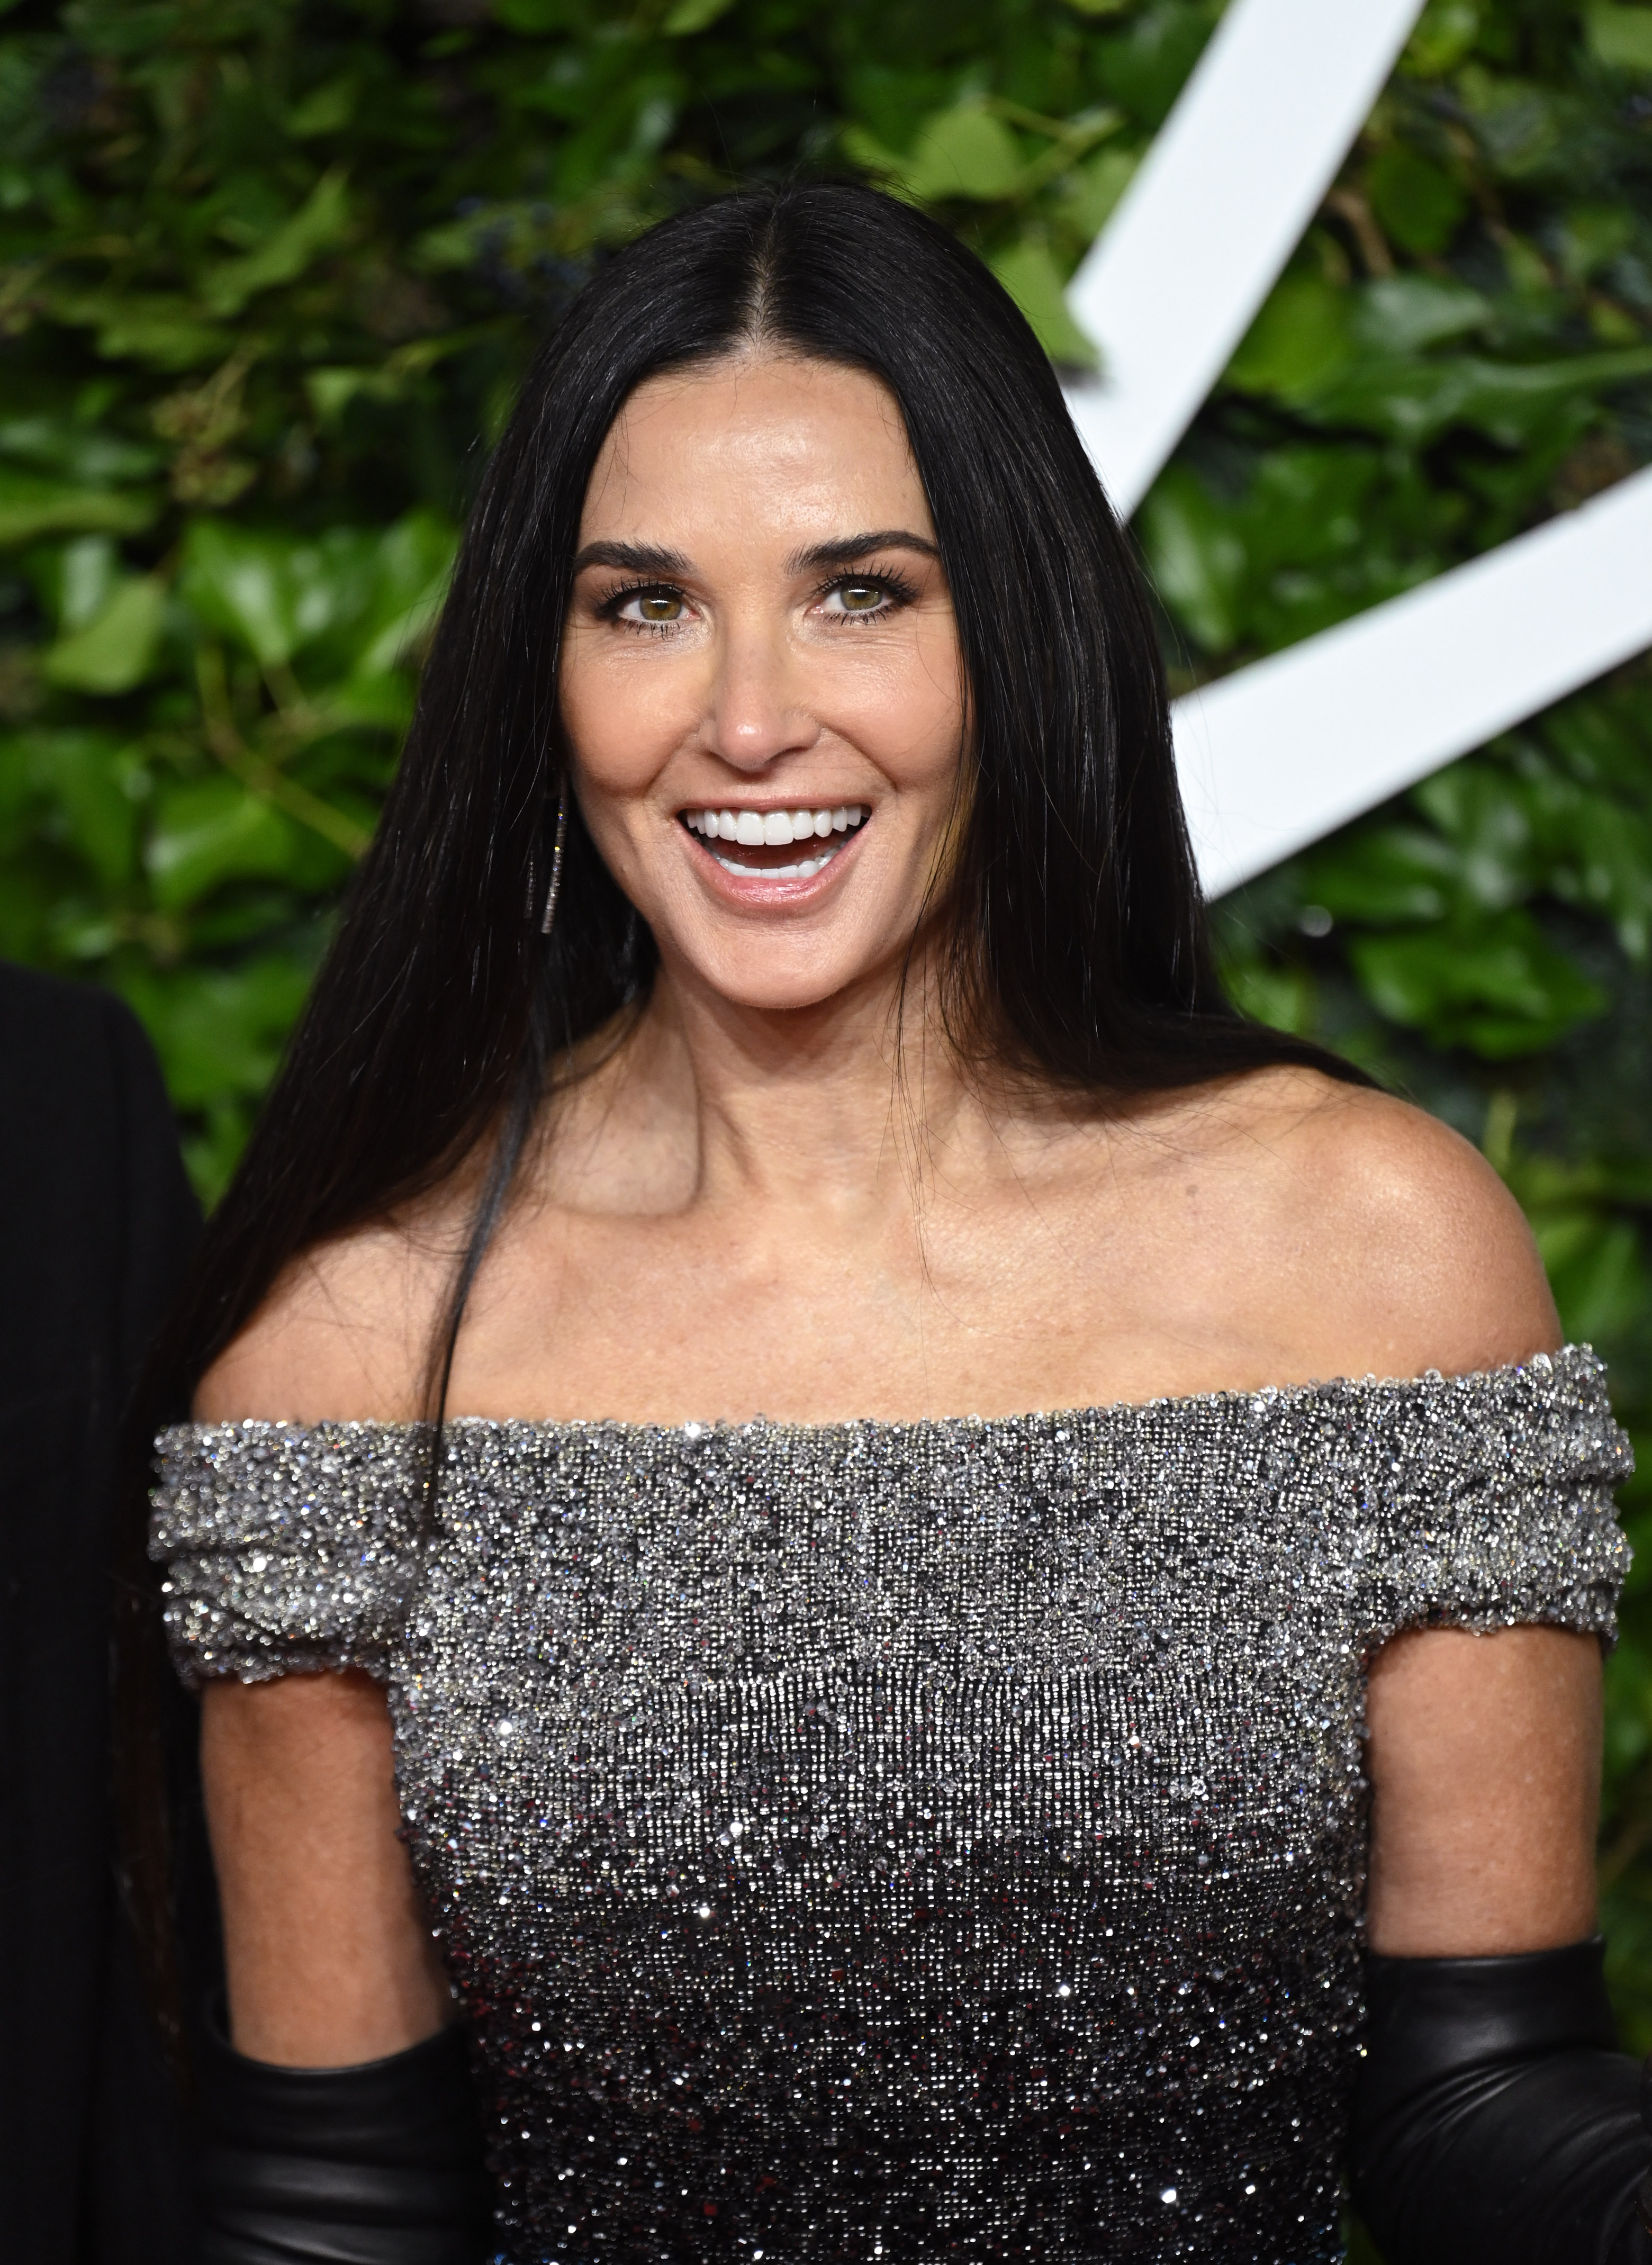 Demi Moore besucht die The Fashion Awards 2021 in der Royal Albert Hall am 29. November 2021 in London, England.